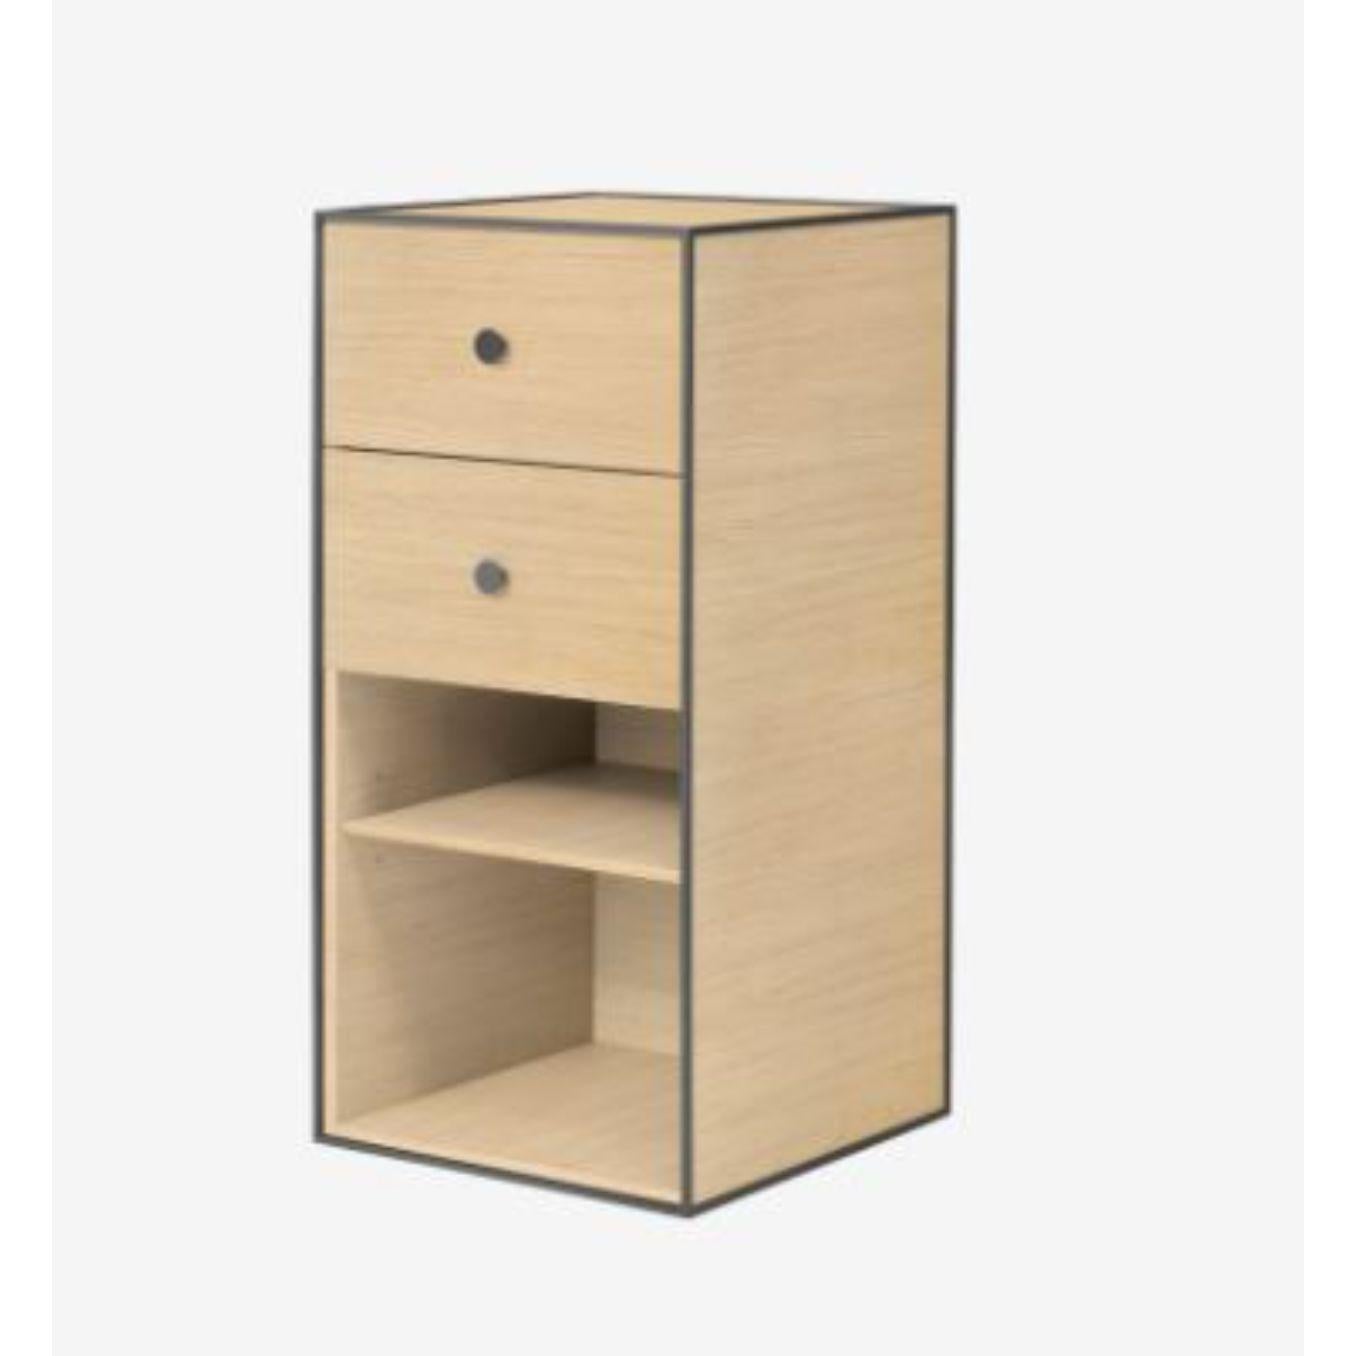 70 Oak frame box with shelf / 2 drawers by Lassen
Dimensions: D 35 x W 35 x H 70 cm 
Materials: Finér, Melamin, Melamin, Melamine, Metal, Veneer, Oak
Also available in different colors and dimensions. 
Weight: 13 Kg


By Lassen is a Danish